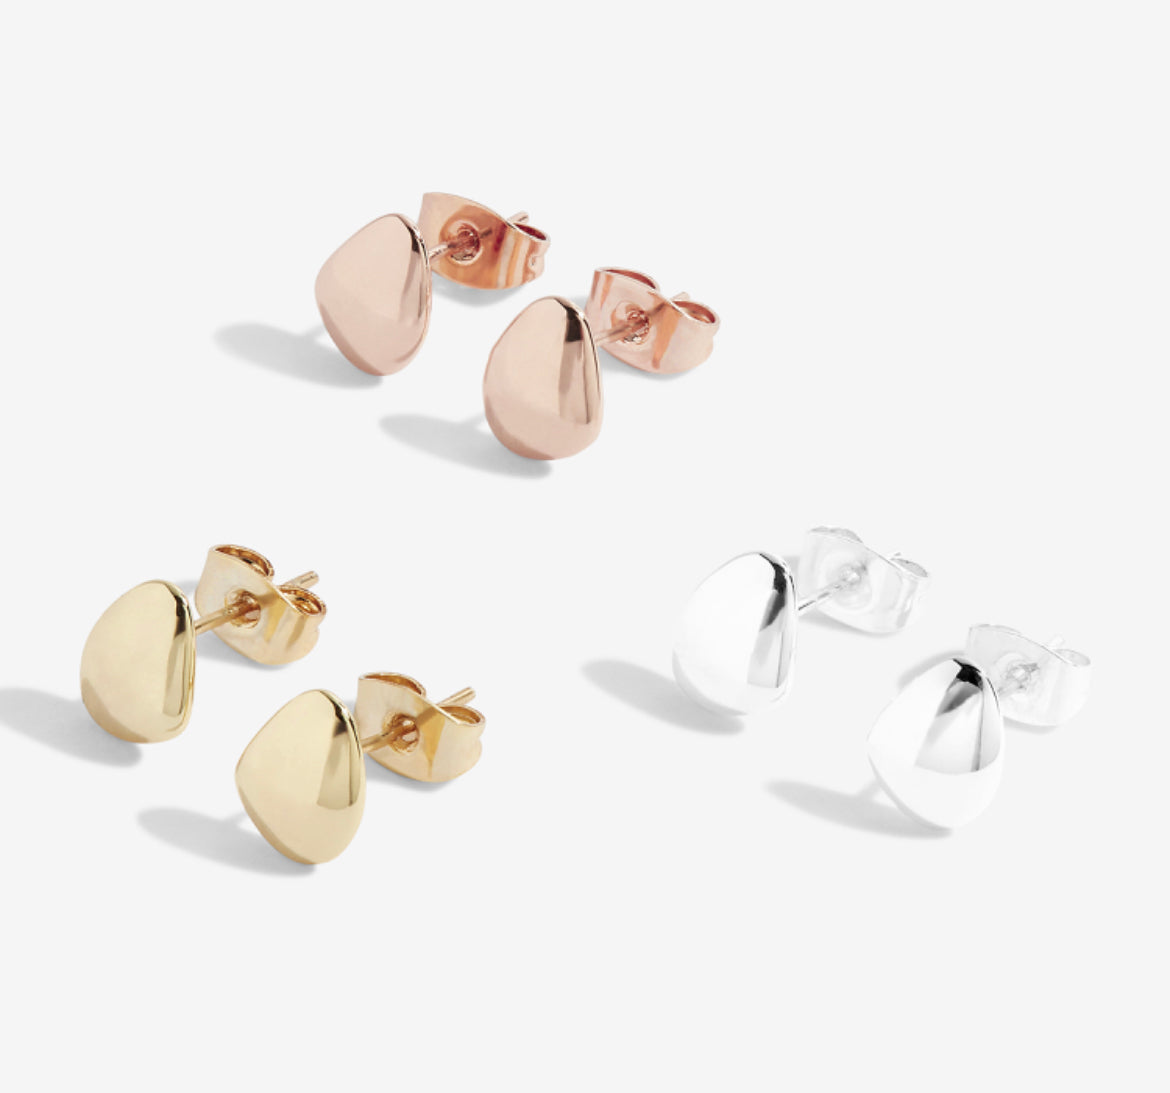 FLORENCE PEBBLE STUD EARRINGS SILVER, ROSE GOLD SET OF 3